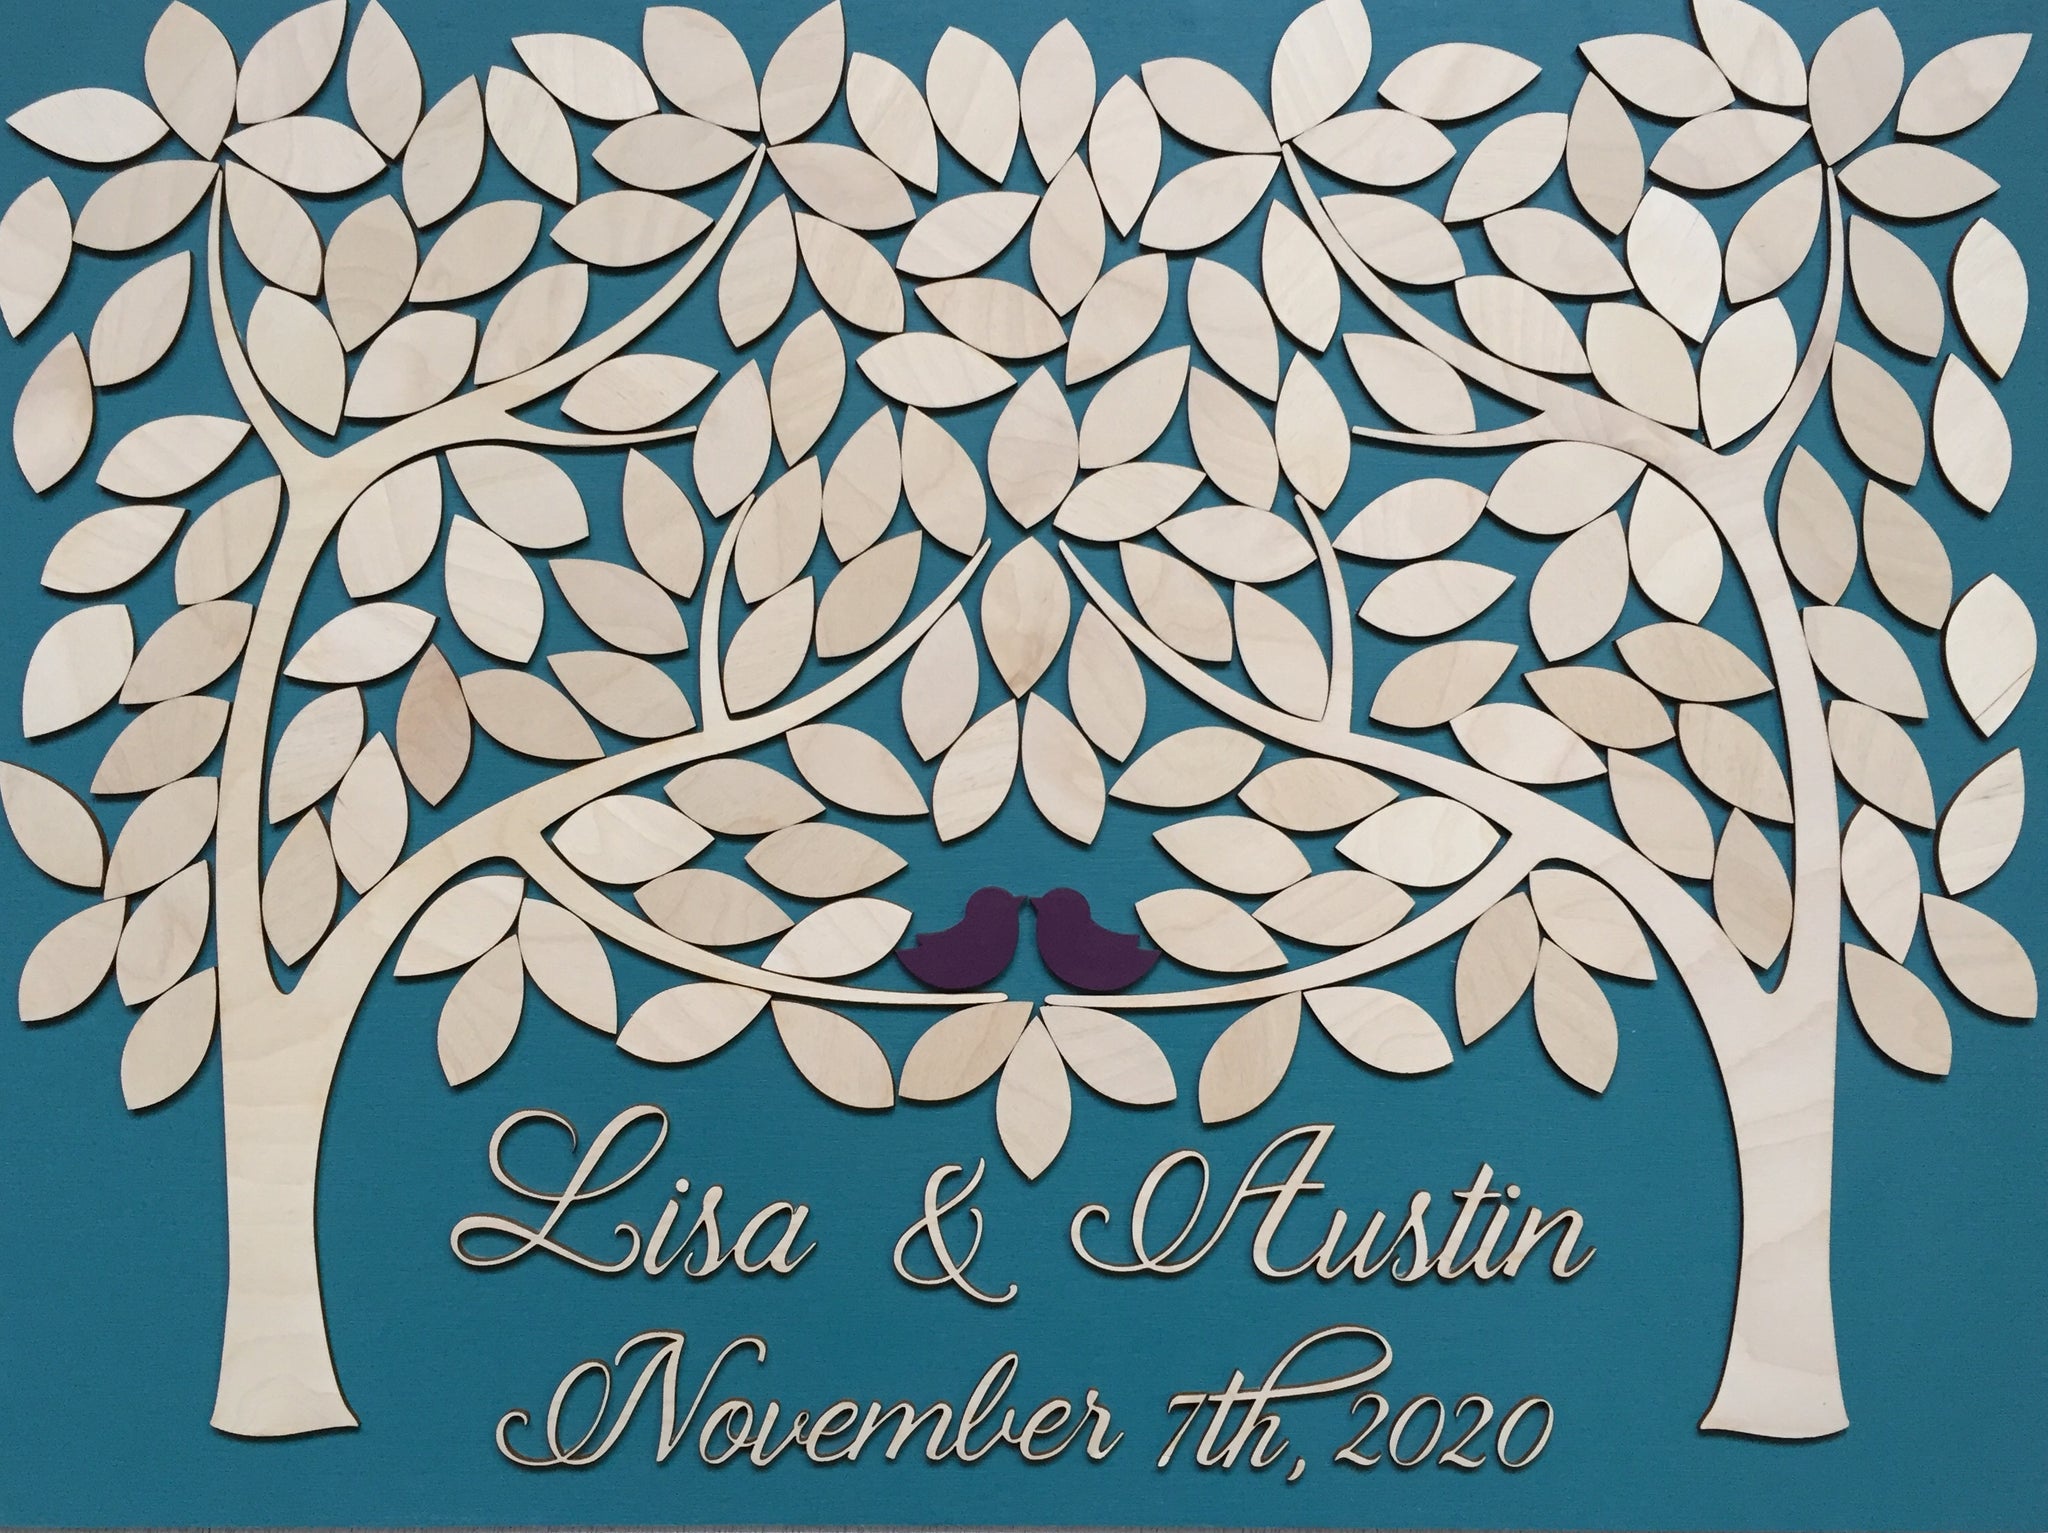  Teal custom guest book alternative with personalized details and colors signyoustyle.com